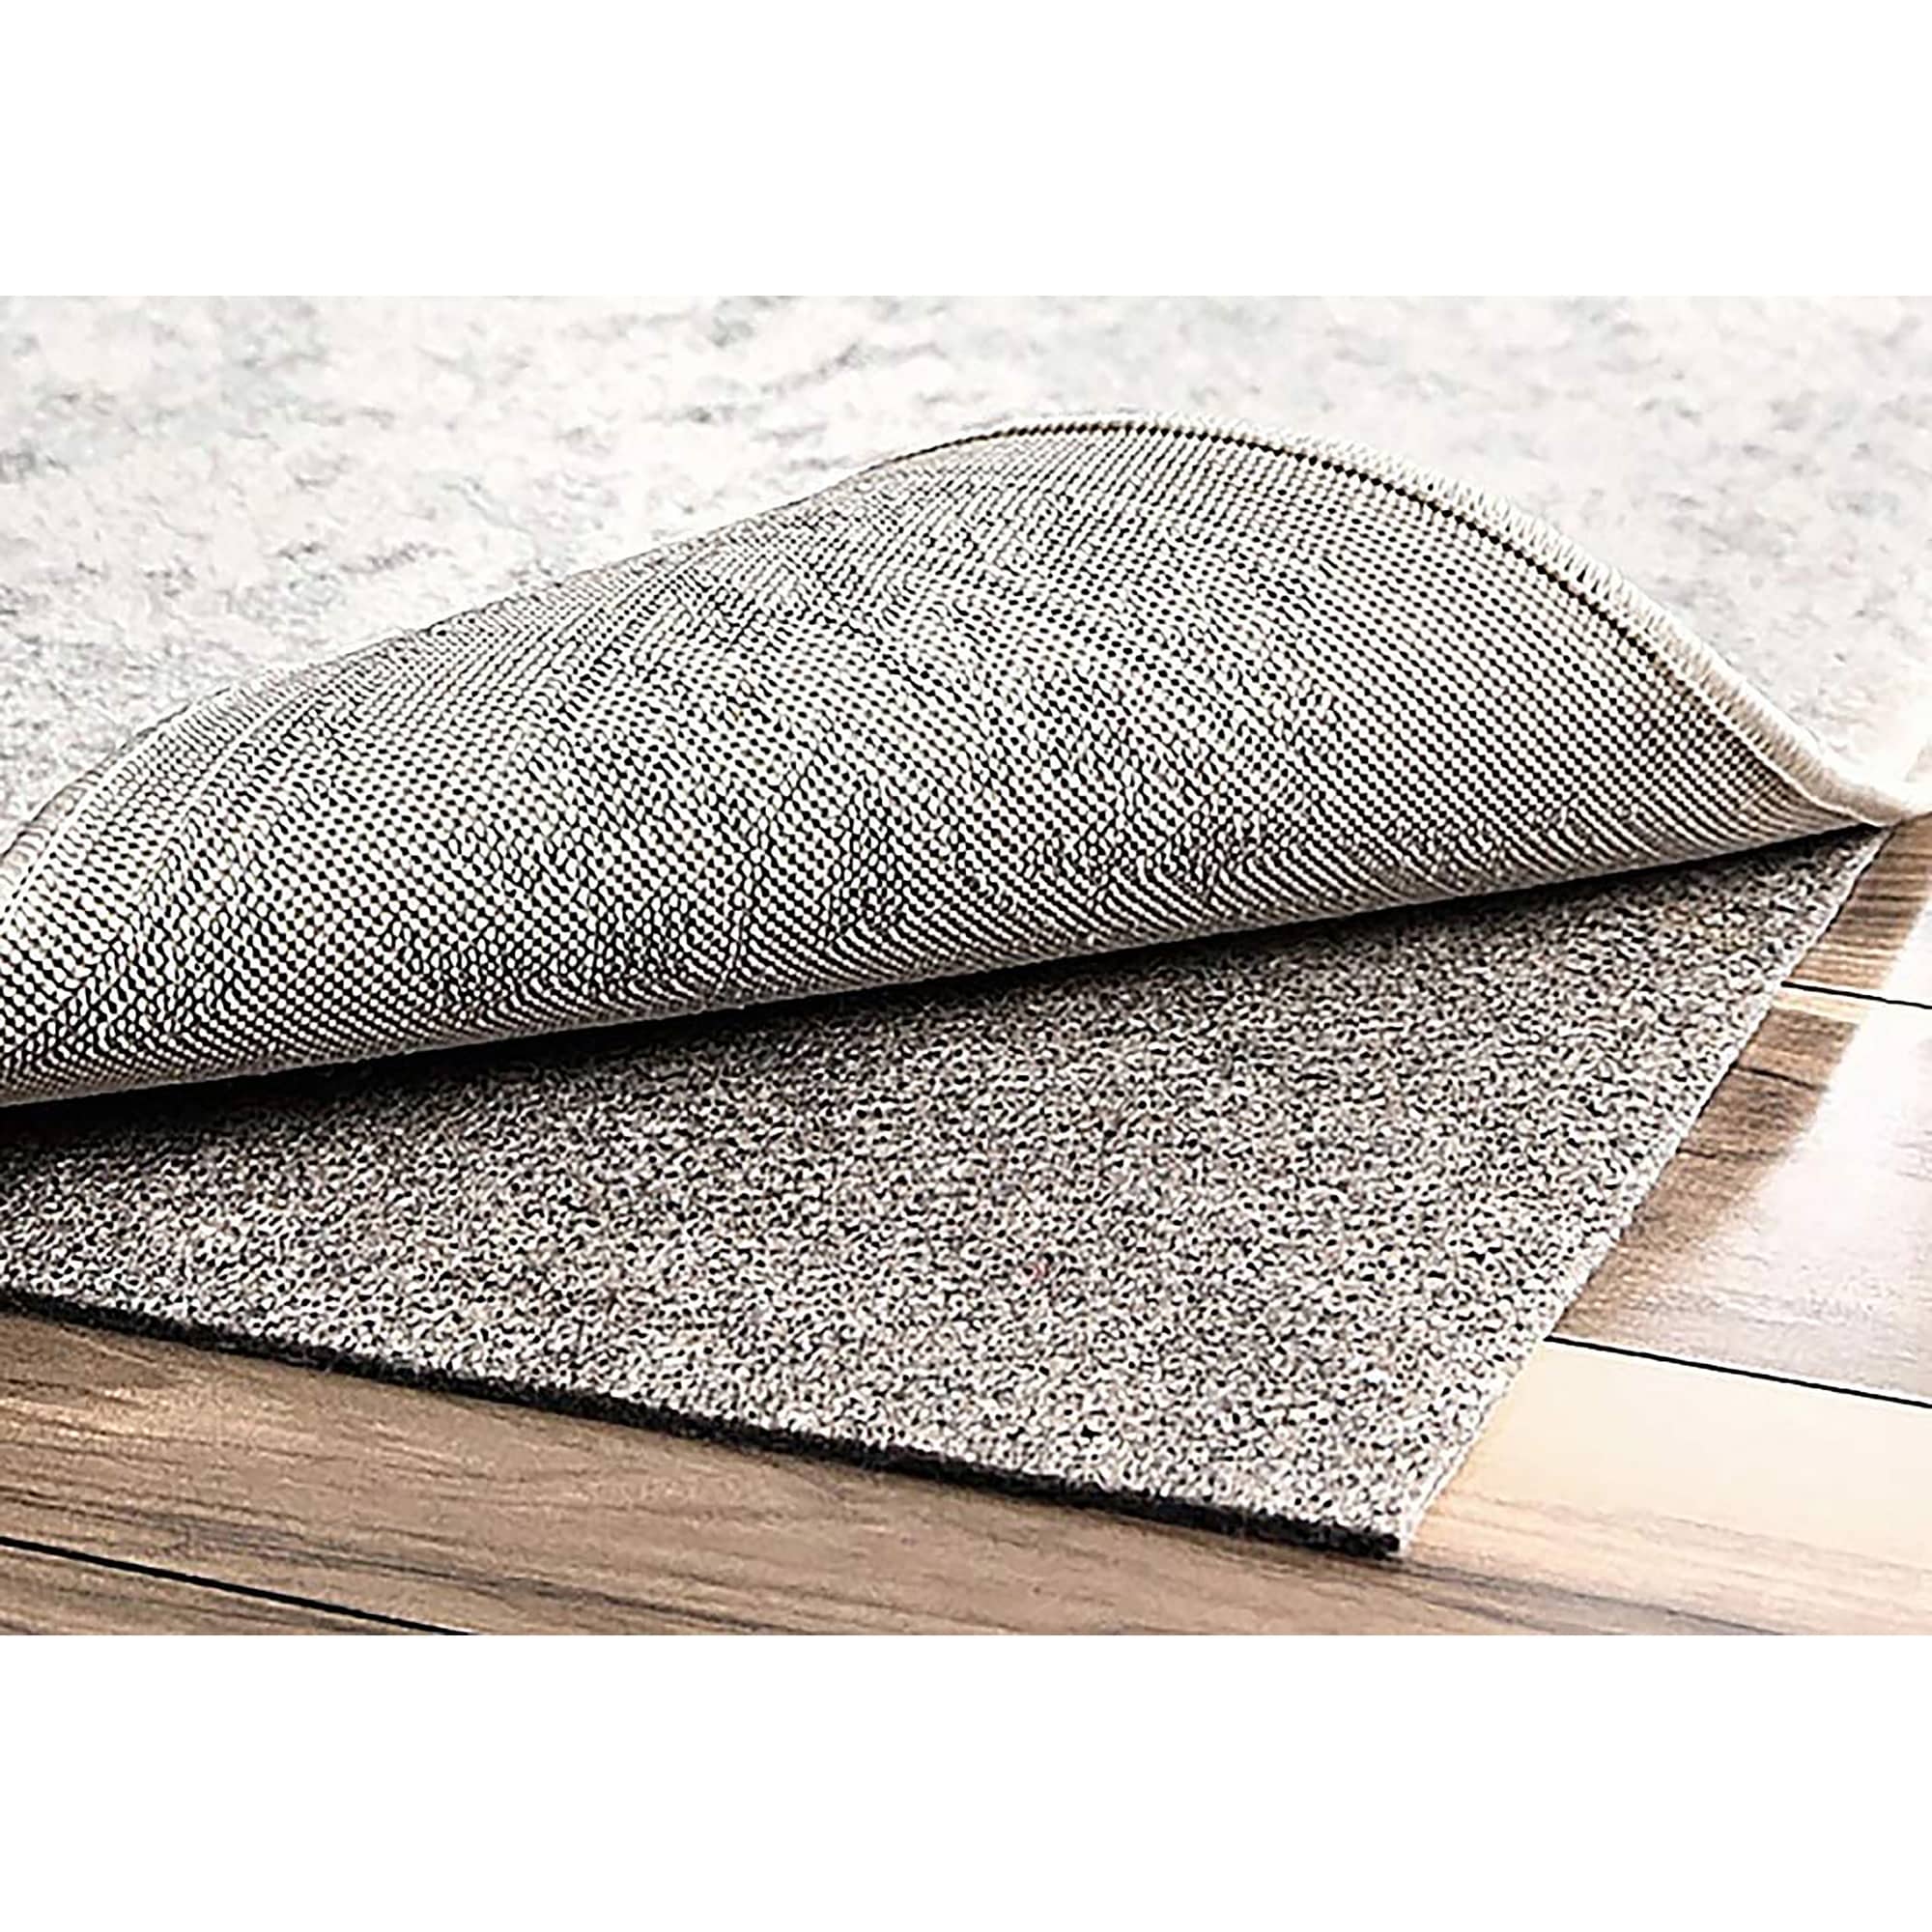 Thick Grey Non-slip Noise-reducing Rug Pad for Hardwood Floors - On Sale -  Bed Bath & Beyond - 30957754